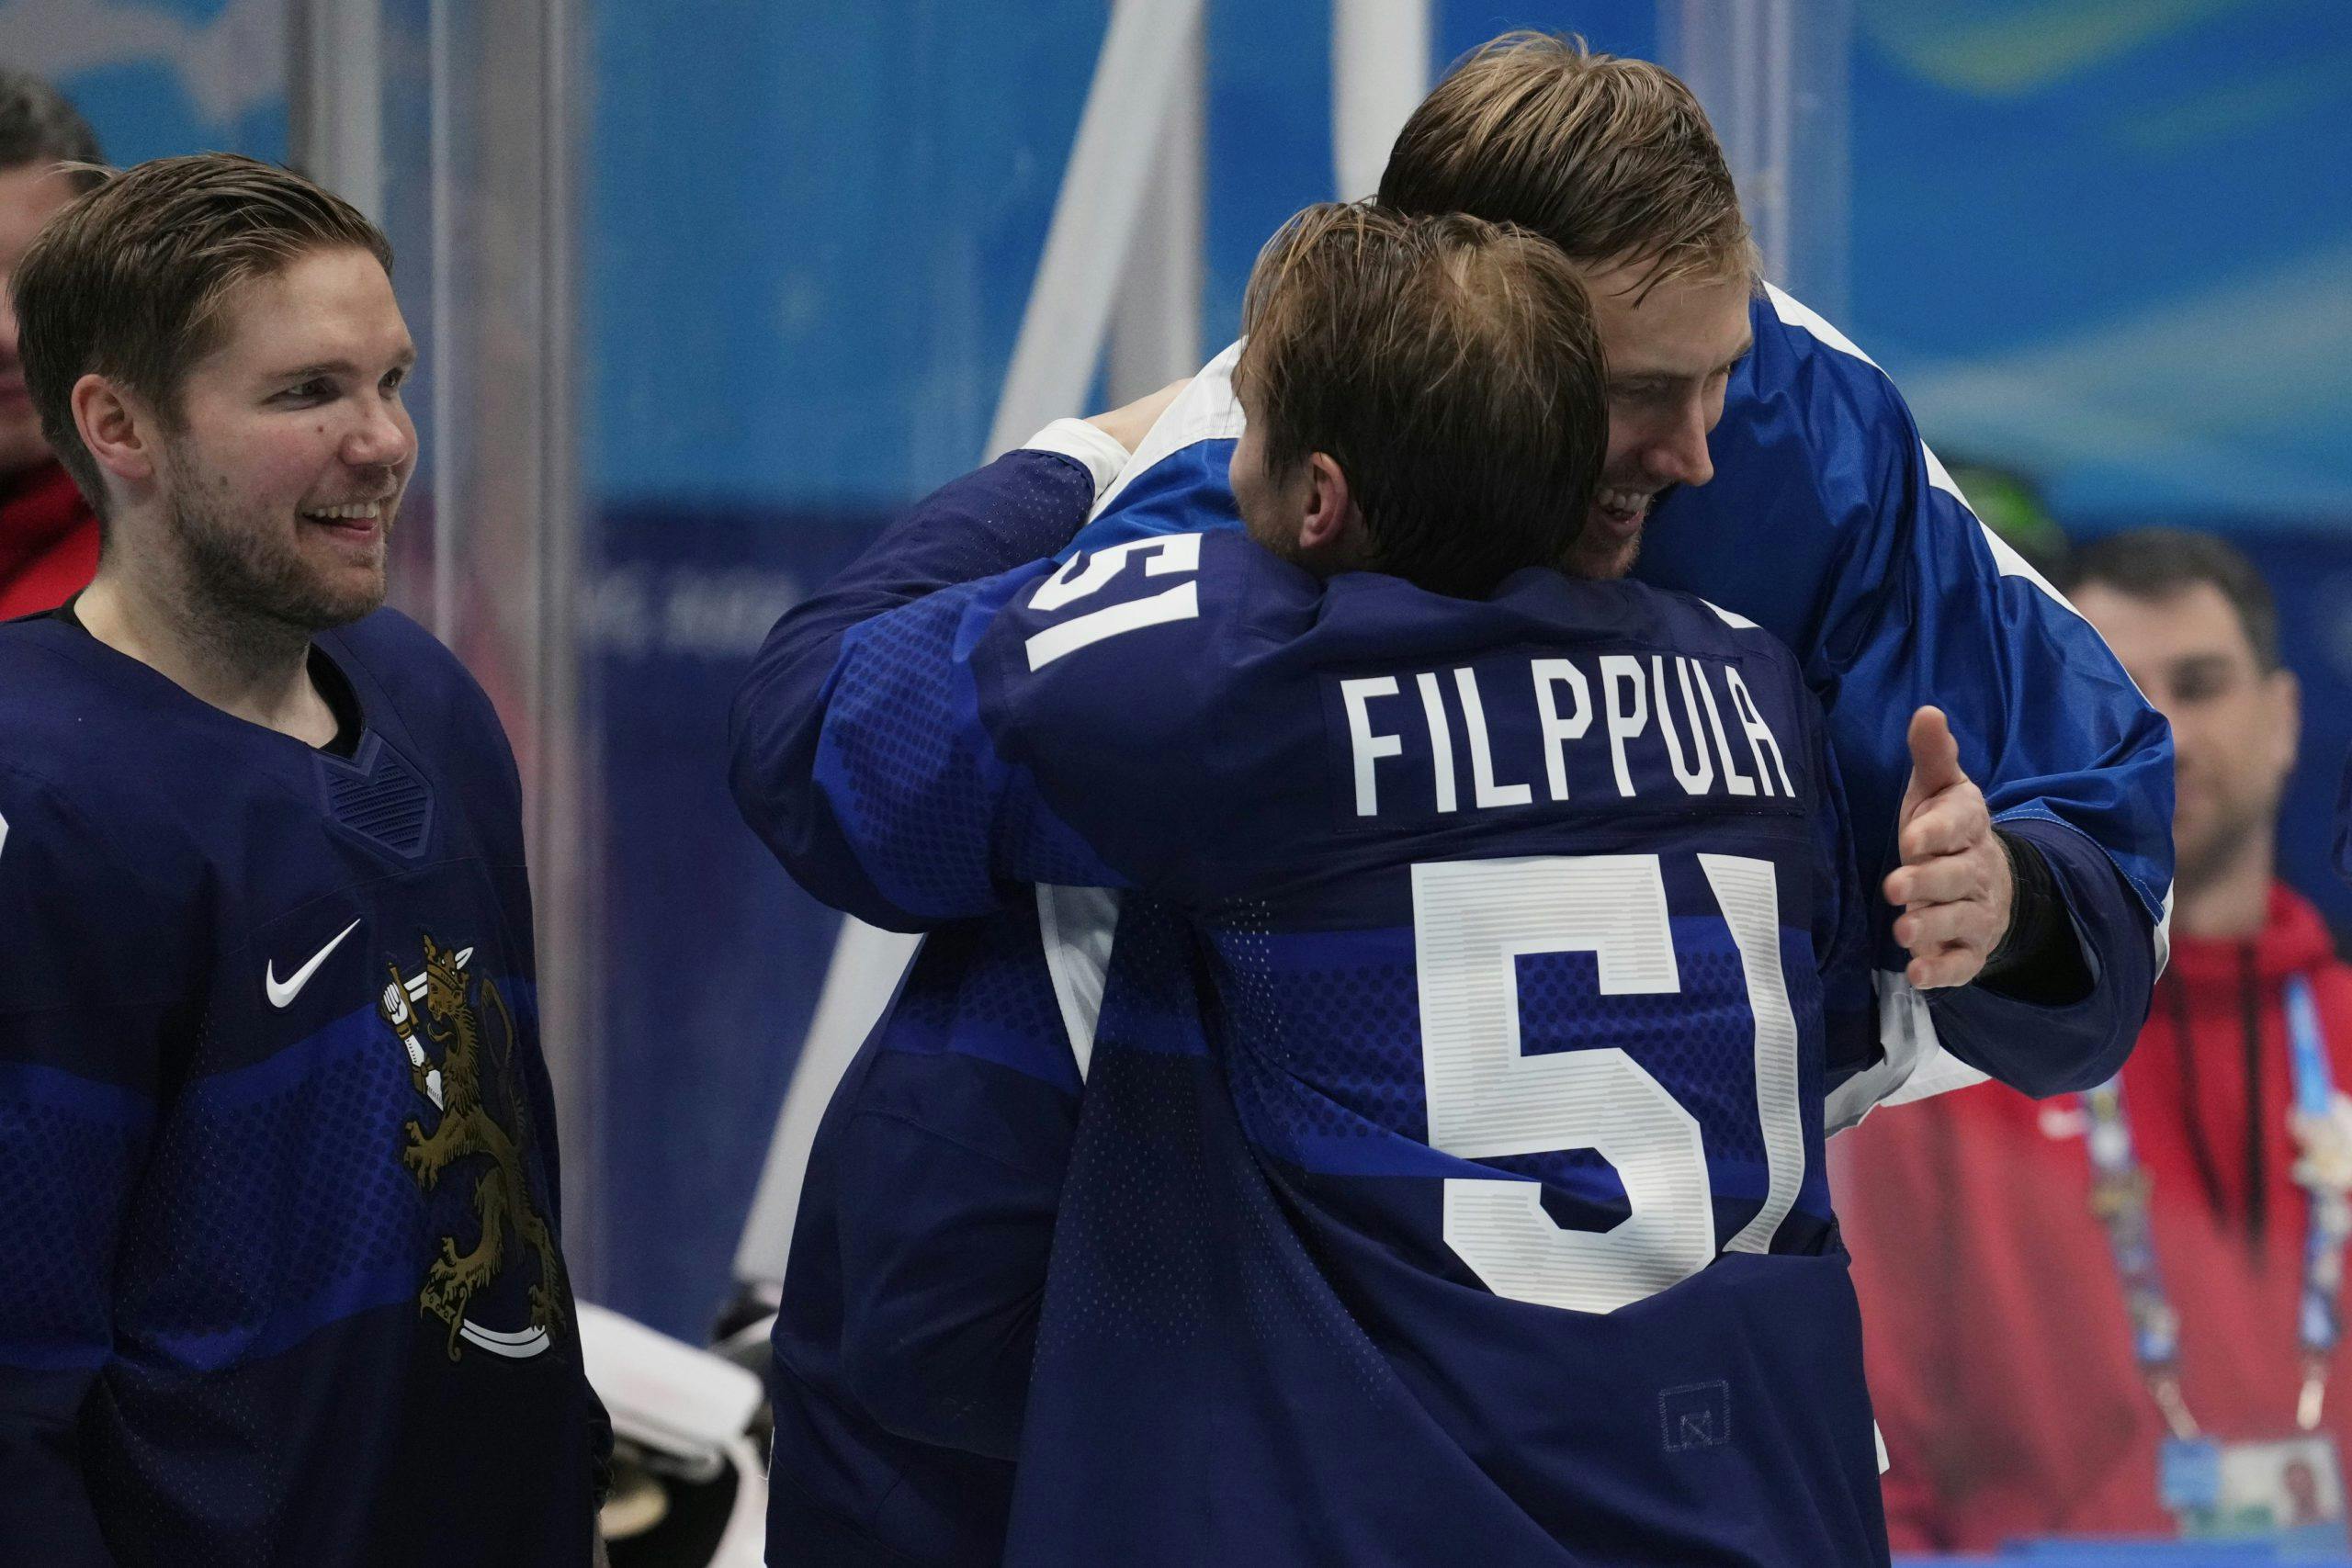 Finland defeats Canada in OT to capture gold at 2022 IIHF World Championship